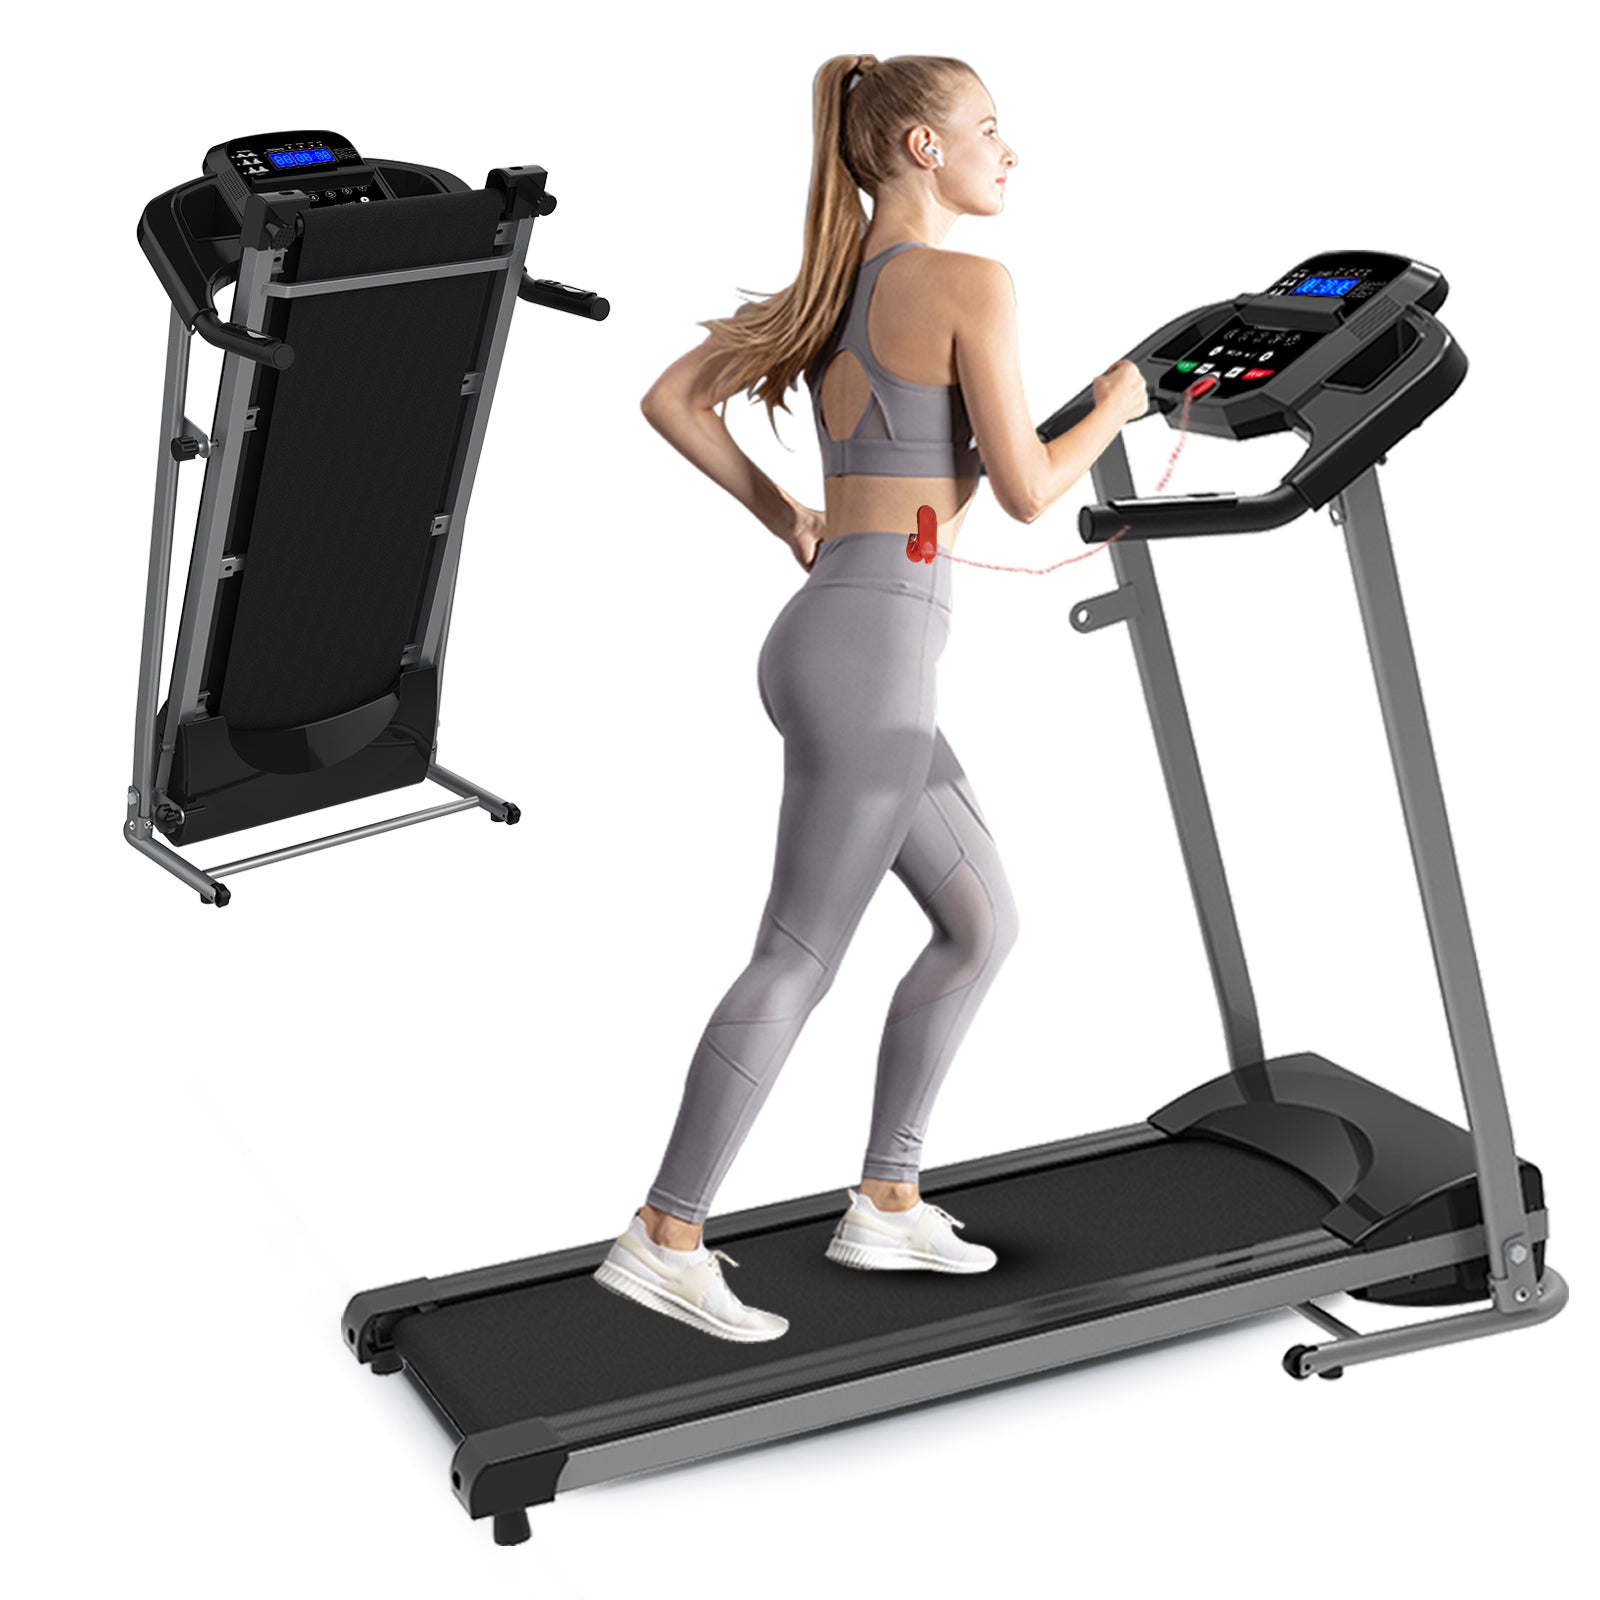 Foldable Electric Treadmill 2.5HP Motorized Running Machine with 12 Perset Programs 265LBS Weight Capacity Walking Jogging Treadmill